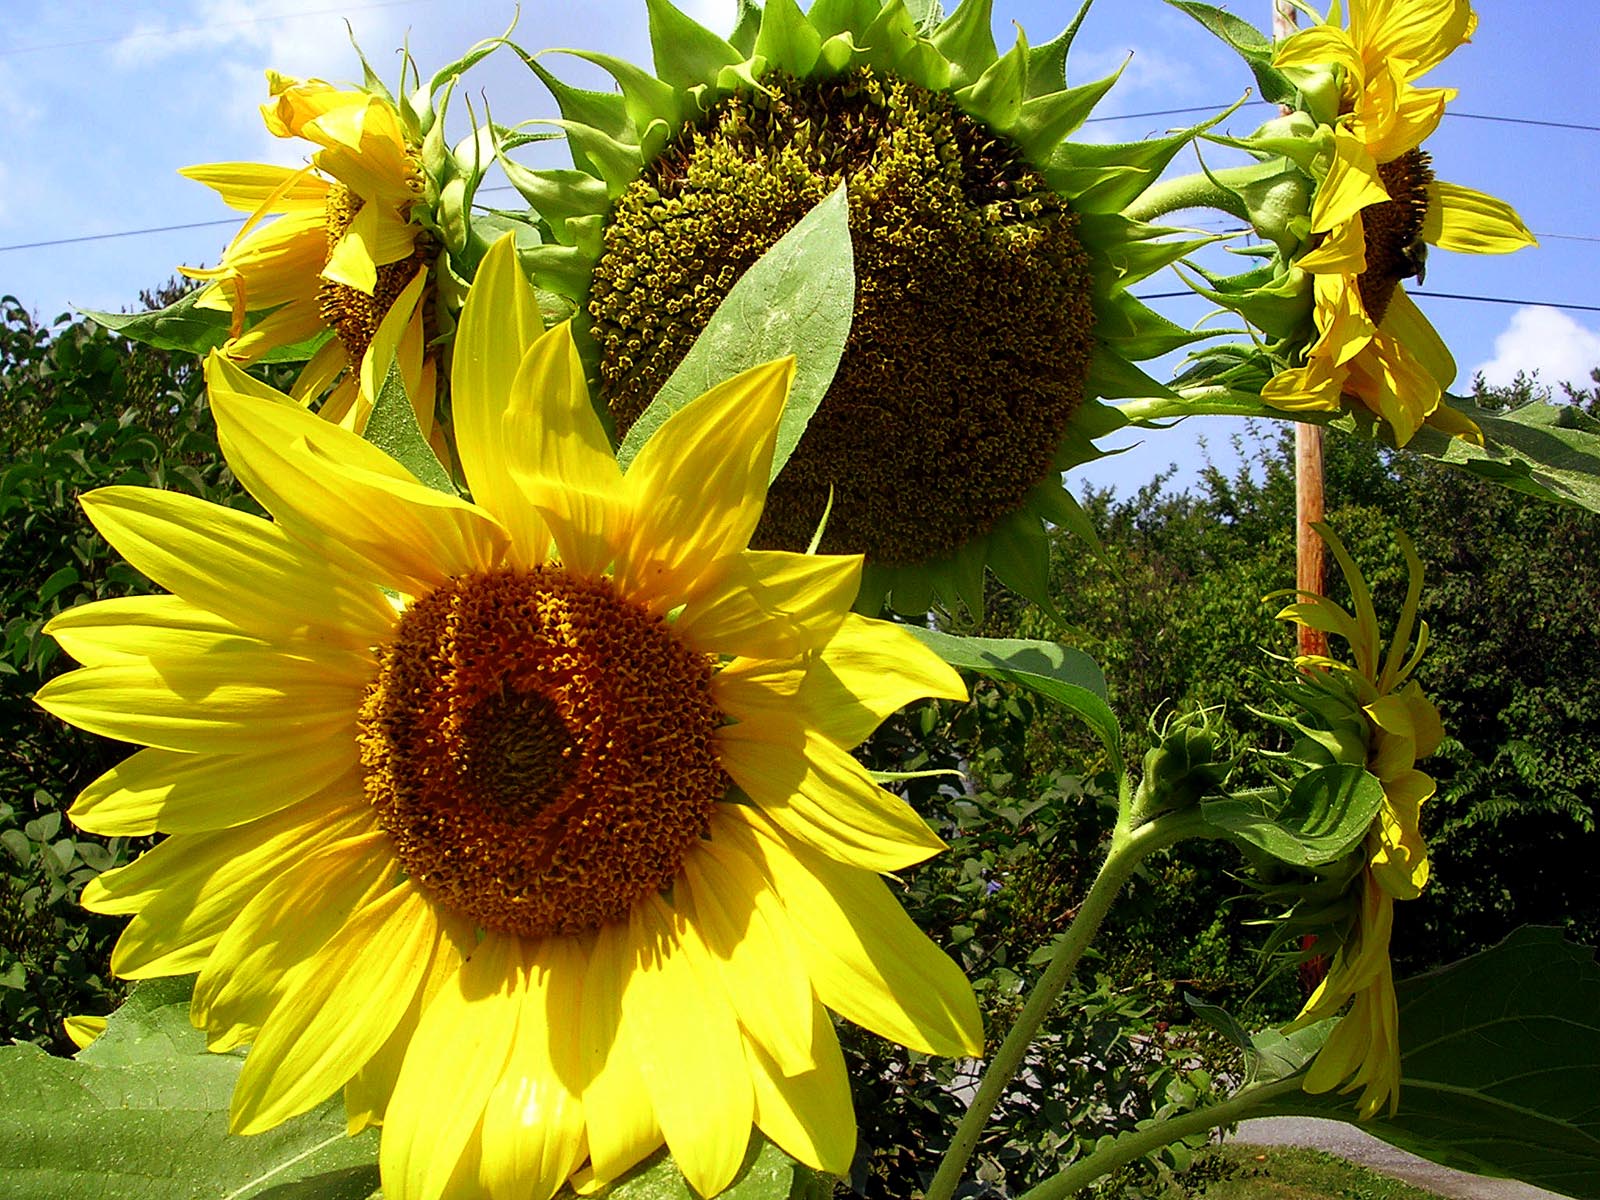 How to grow Sunflowers | Growing Sunflowers from seeds | Sunflower care